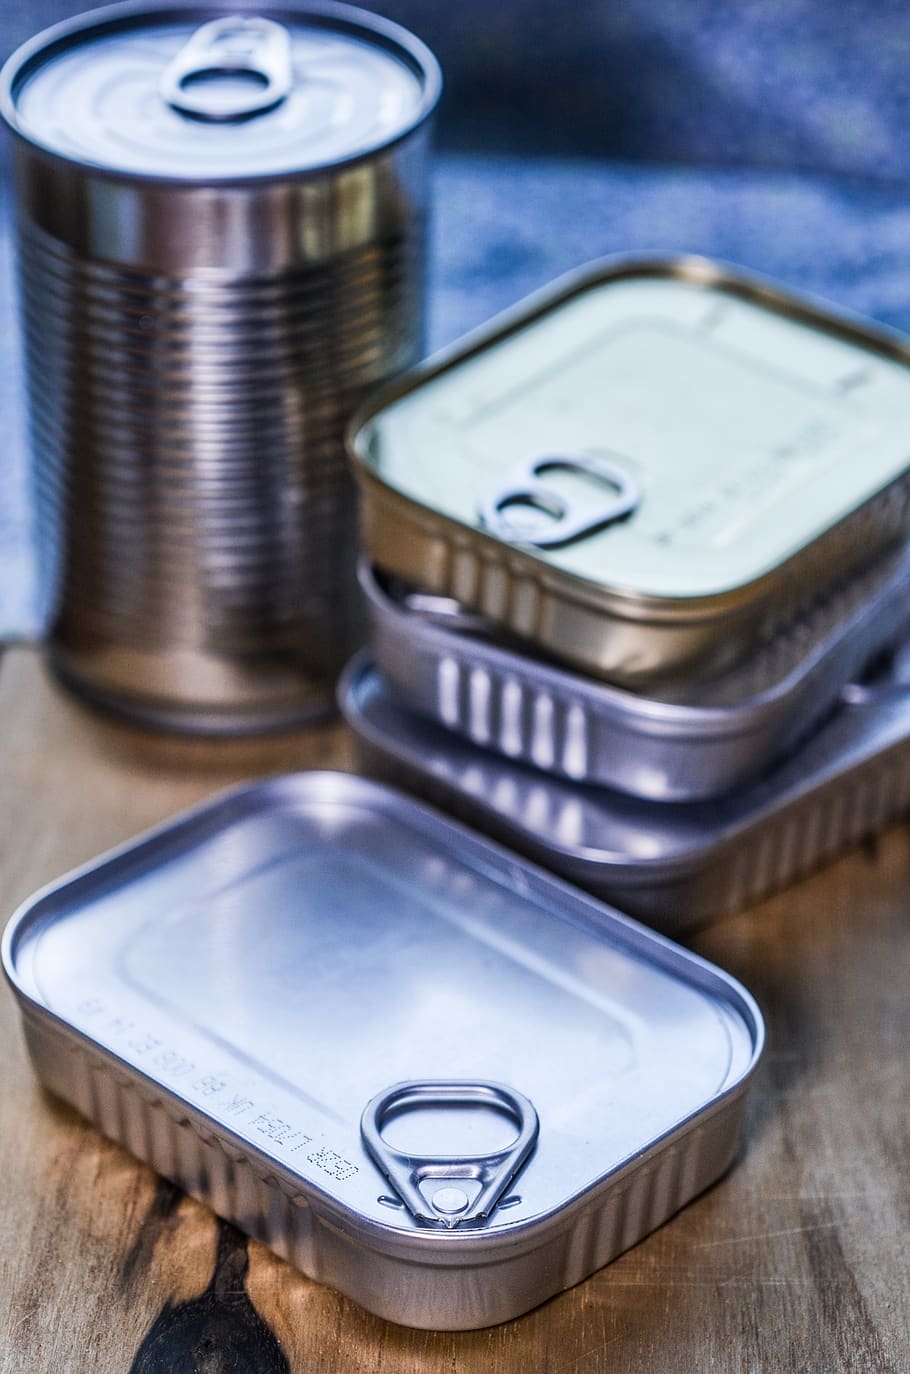 can, kitchen, product, wooden, canned, container, metal, shiny, steel, conserve